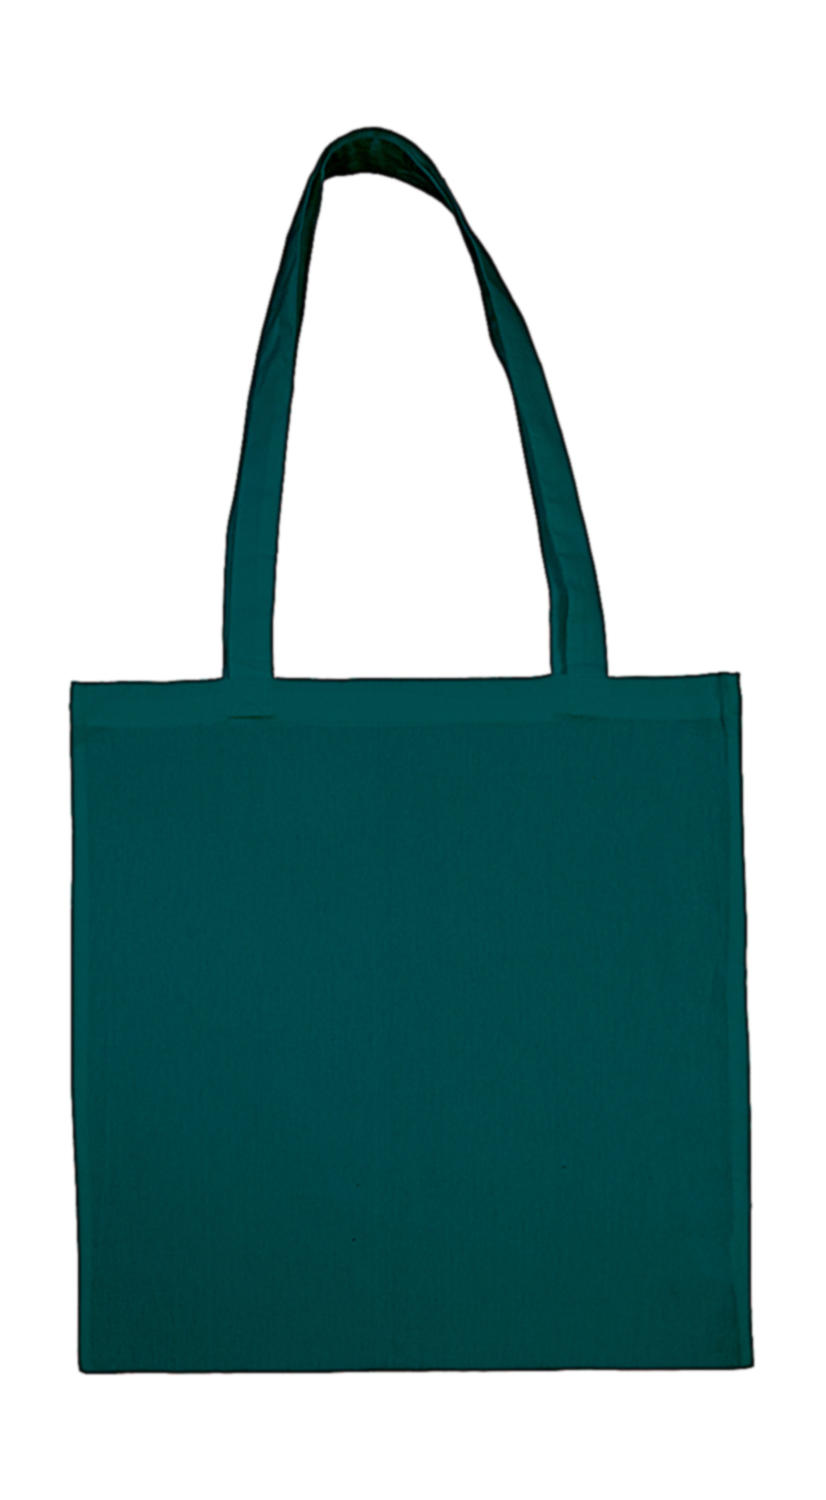  Cotton Bag LH in Farbe Petrol